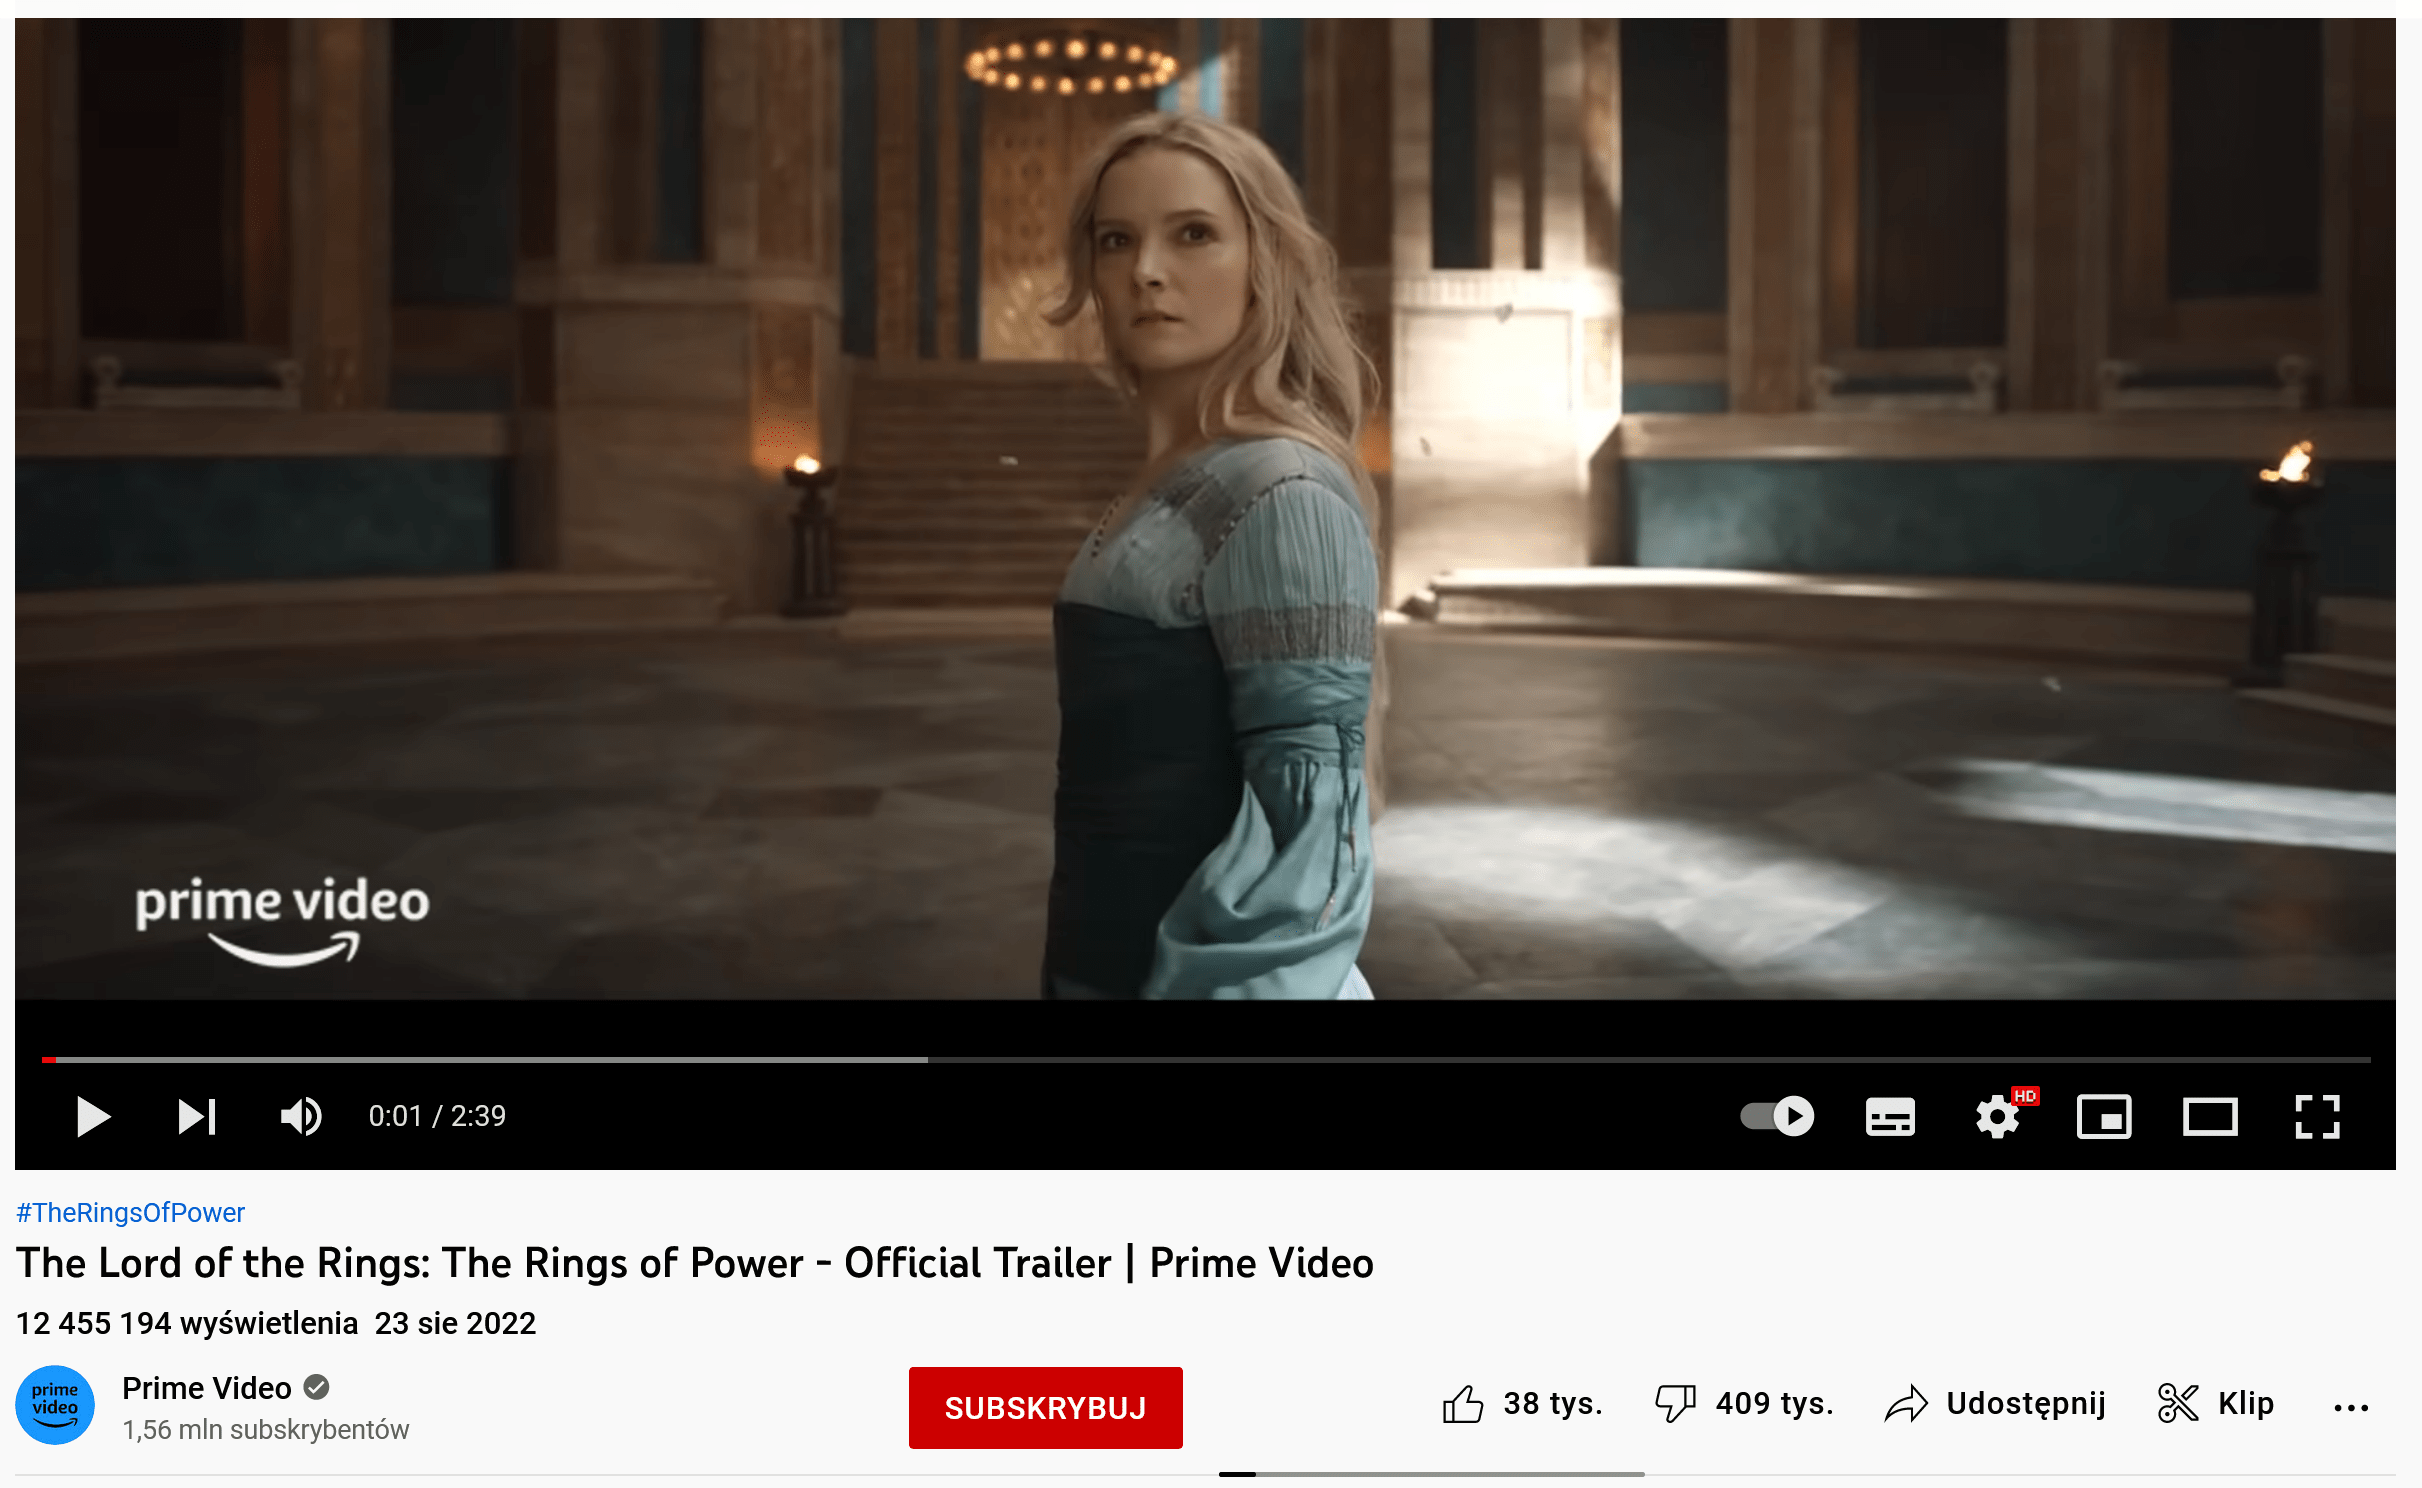 The Lord of the Rings The Rings of Power - Official Trailer Prime Video - YouTube-min.png